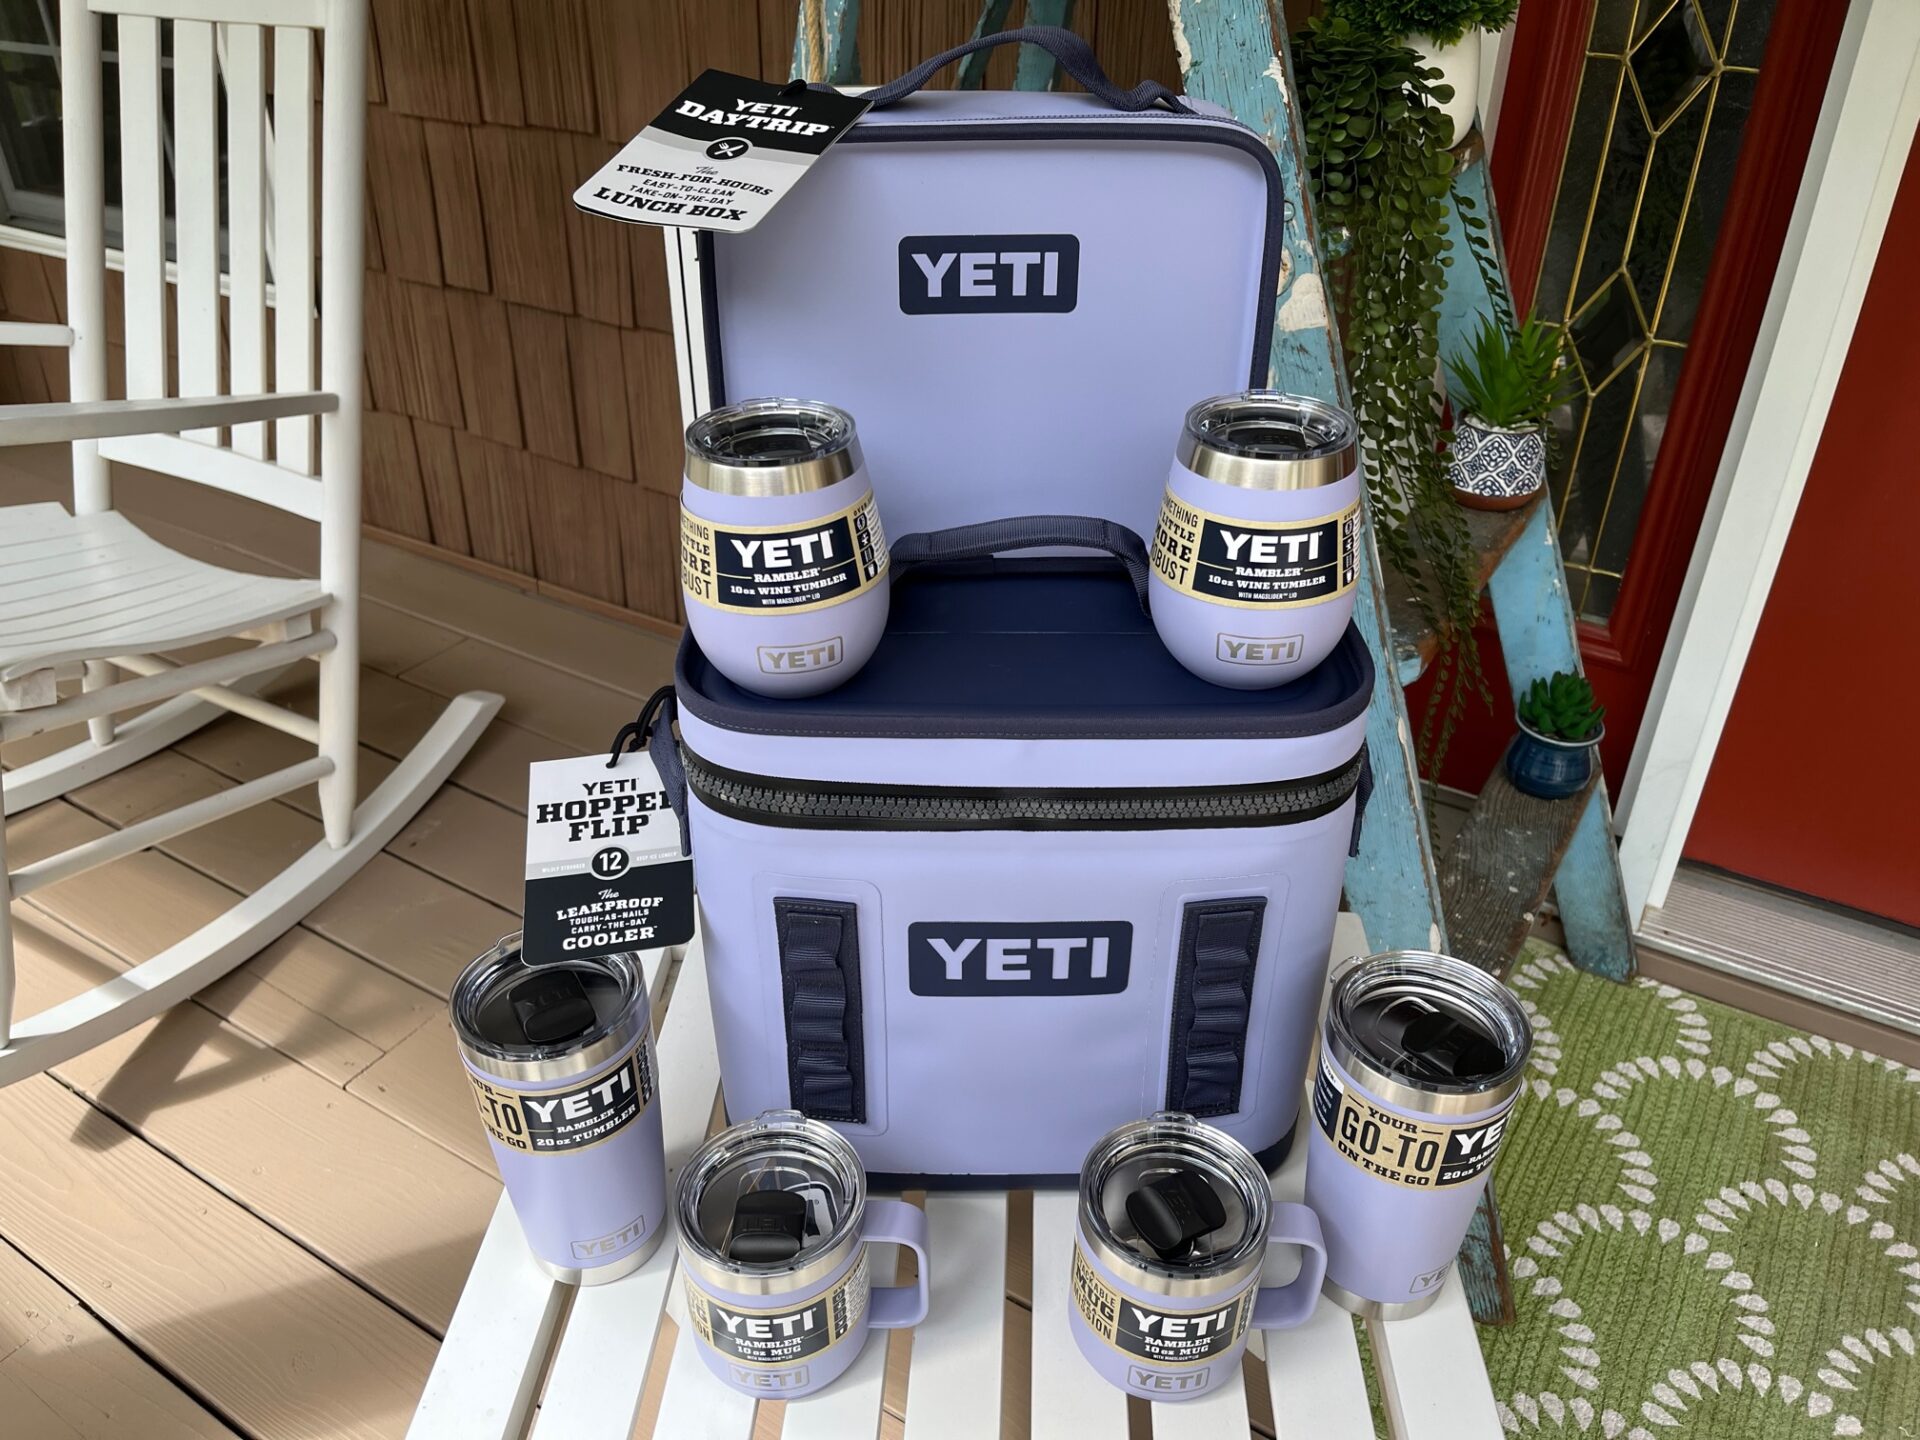 75th Anniversary Yeti Package - Support West Mead 1 VFC